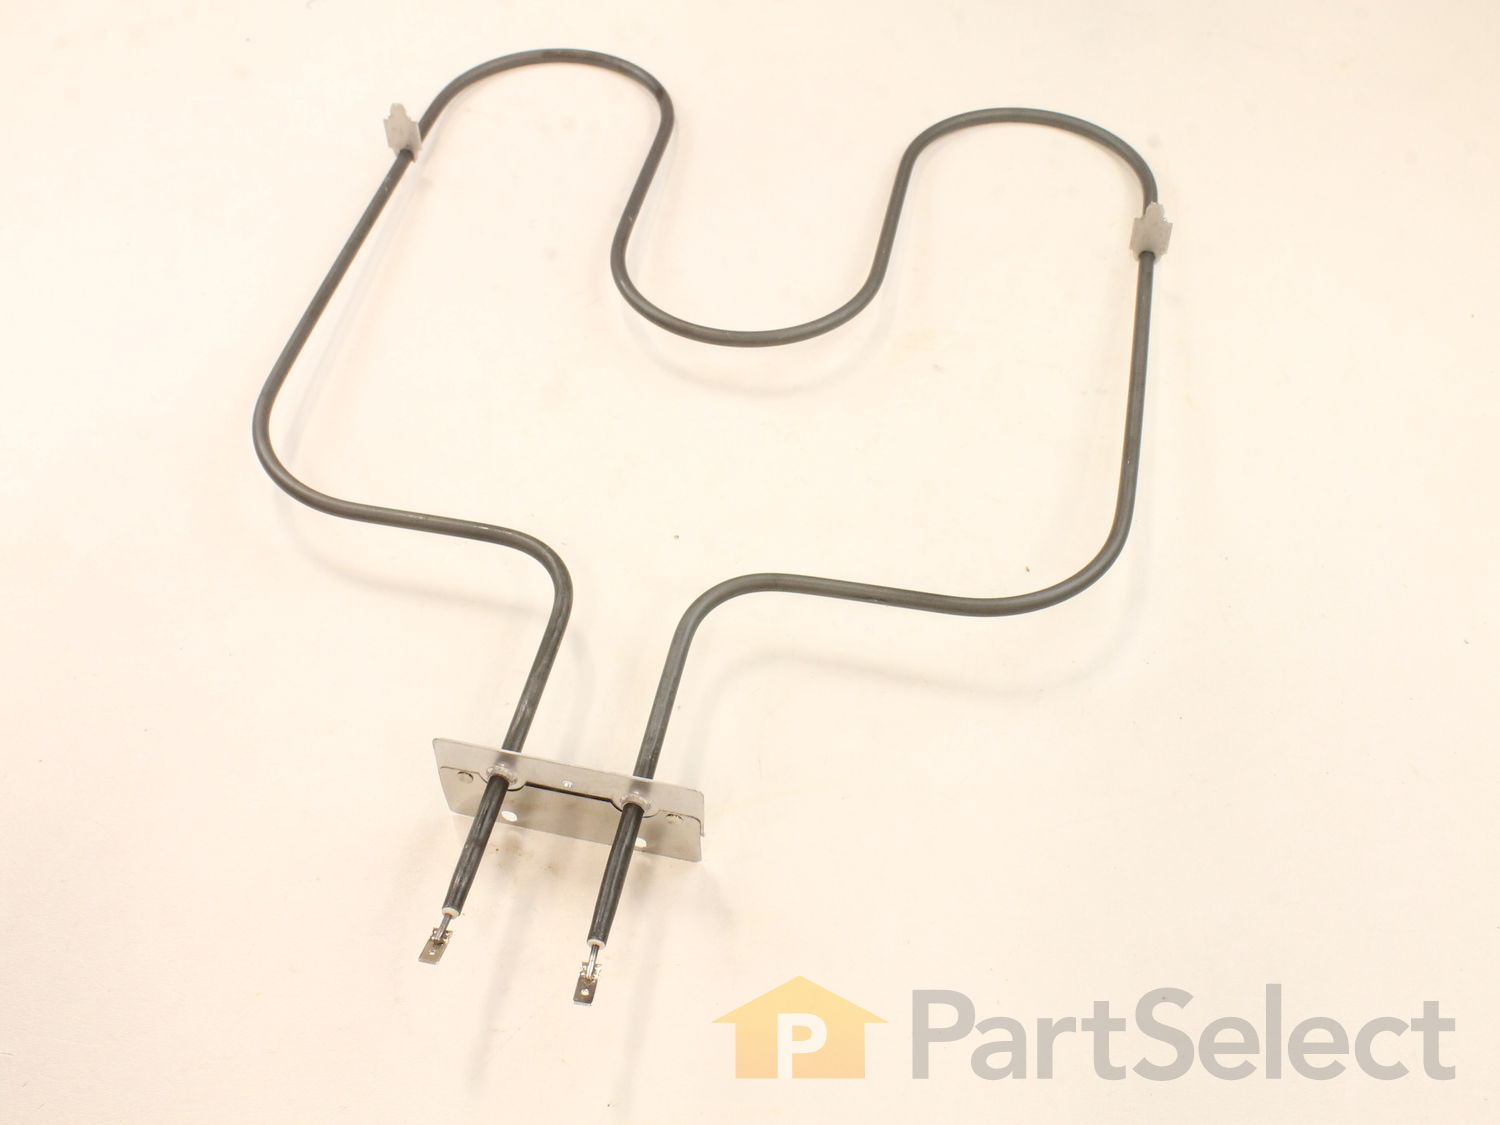 Replacement Bake Element for General Electric & Hotpoint Ranges WB44K5013